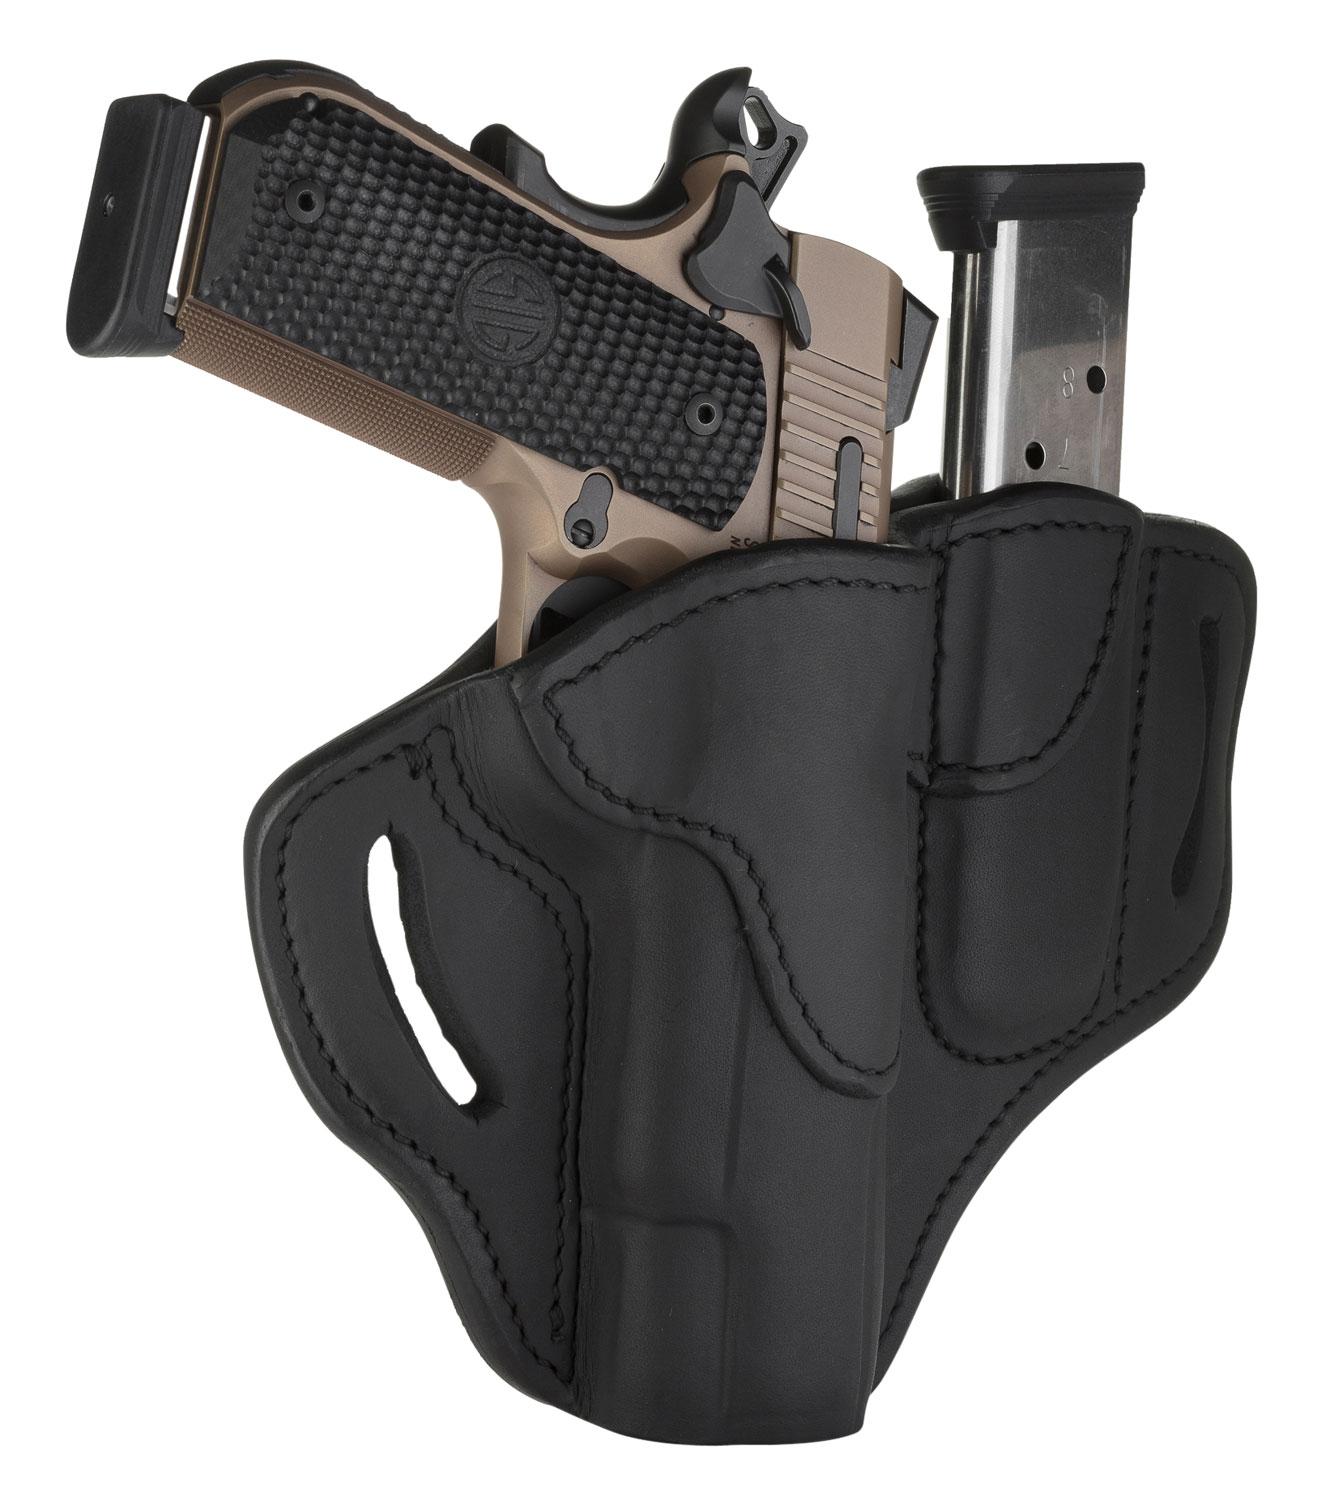  Holster Right Hand Blk 1911 Multi- Fit